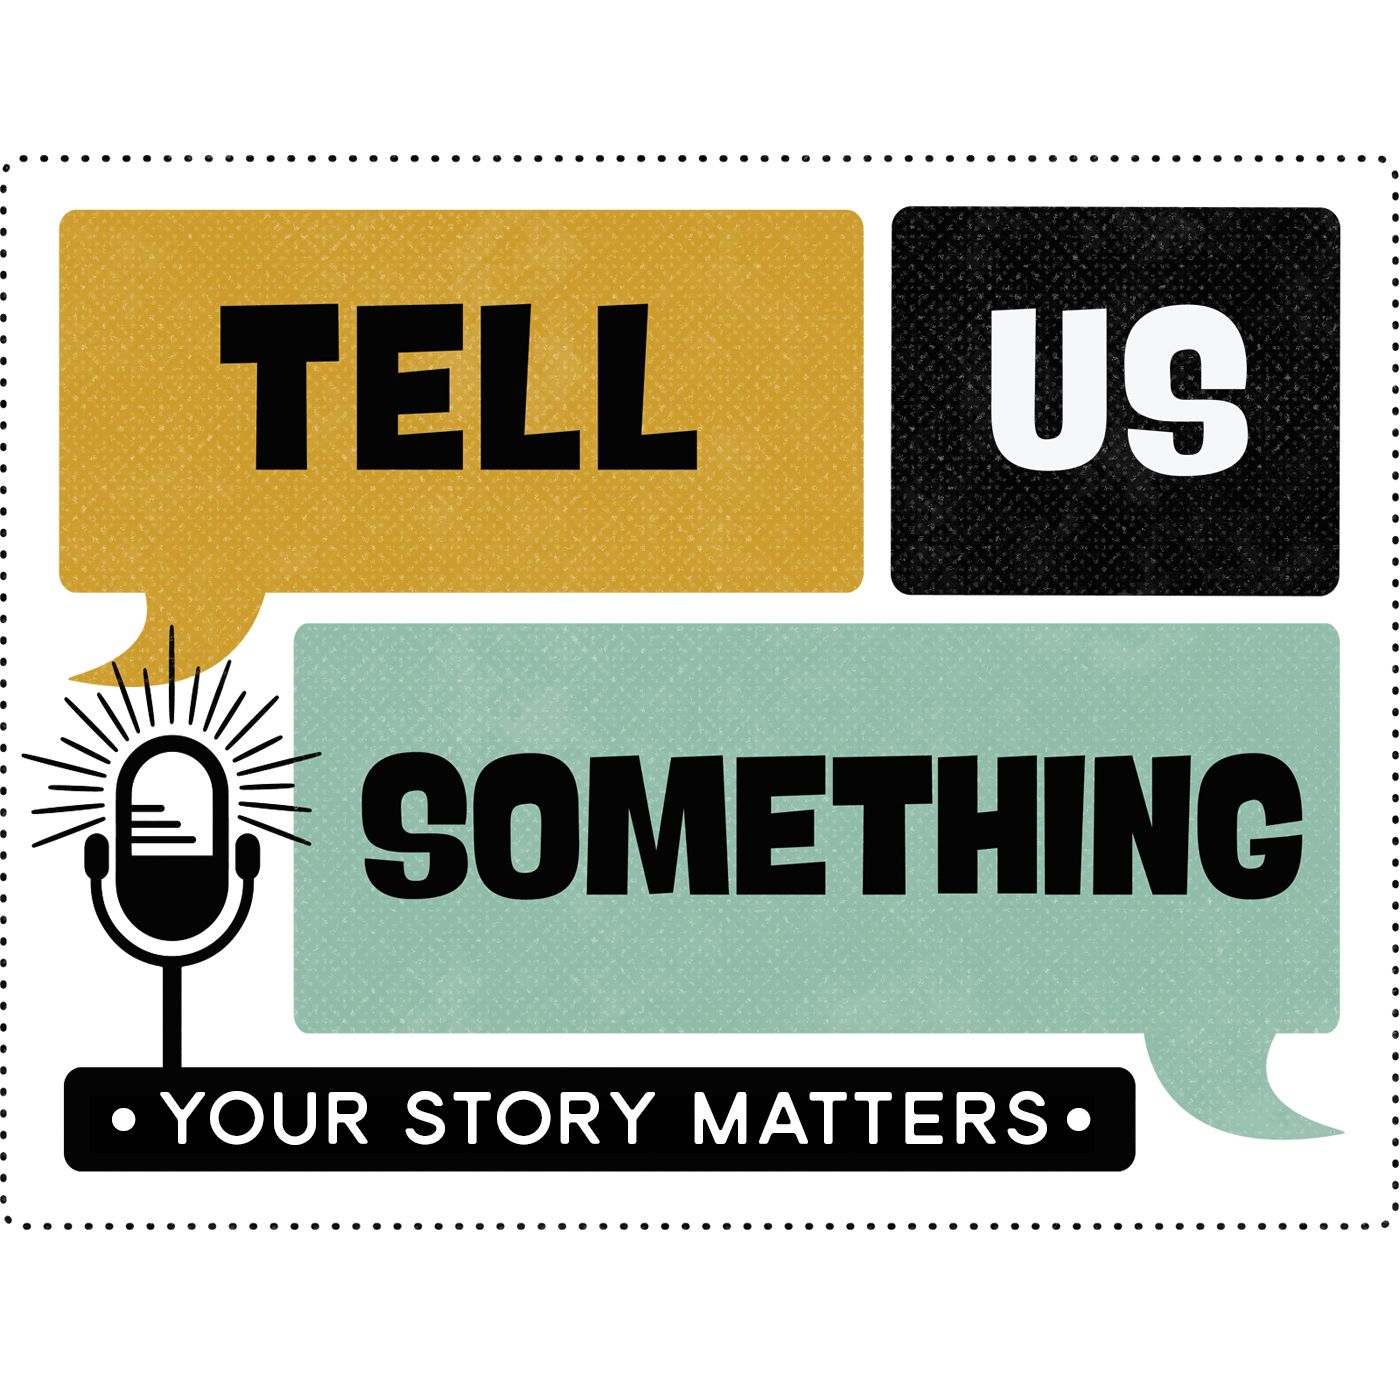 Tell Us Something A Celebration of Storytelling, Community and Each Other photo